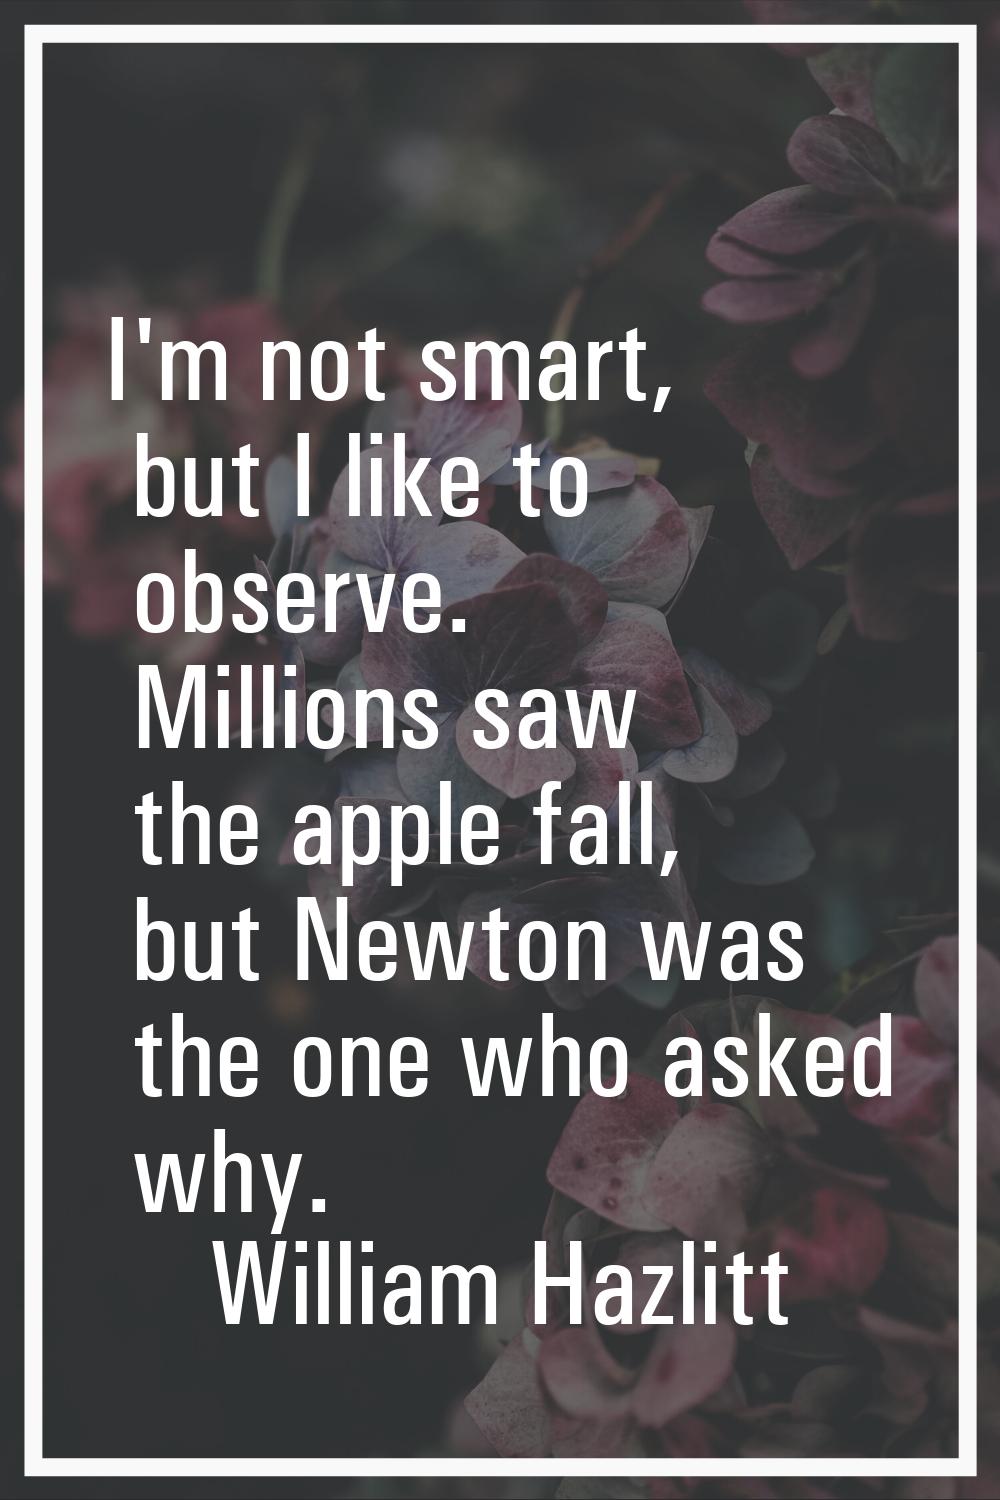 I'm not smart, but I like to observe. Millions saw the apple fall, but Newton was the one who asked